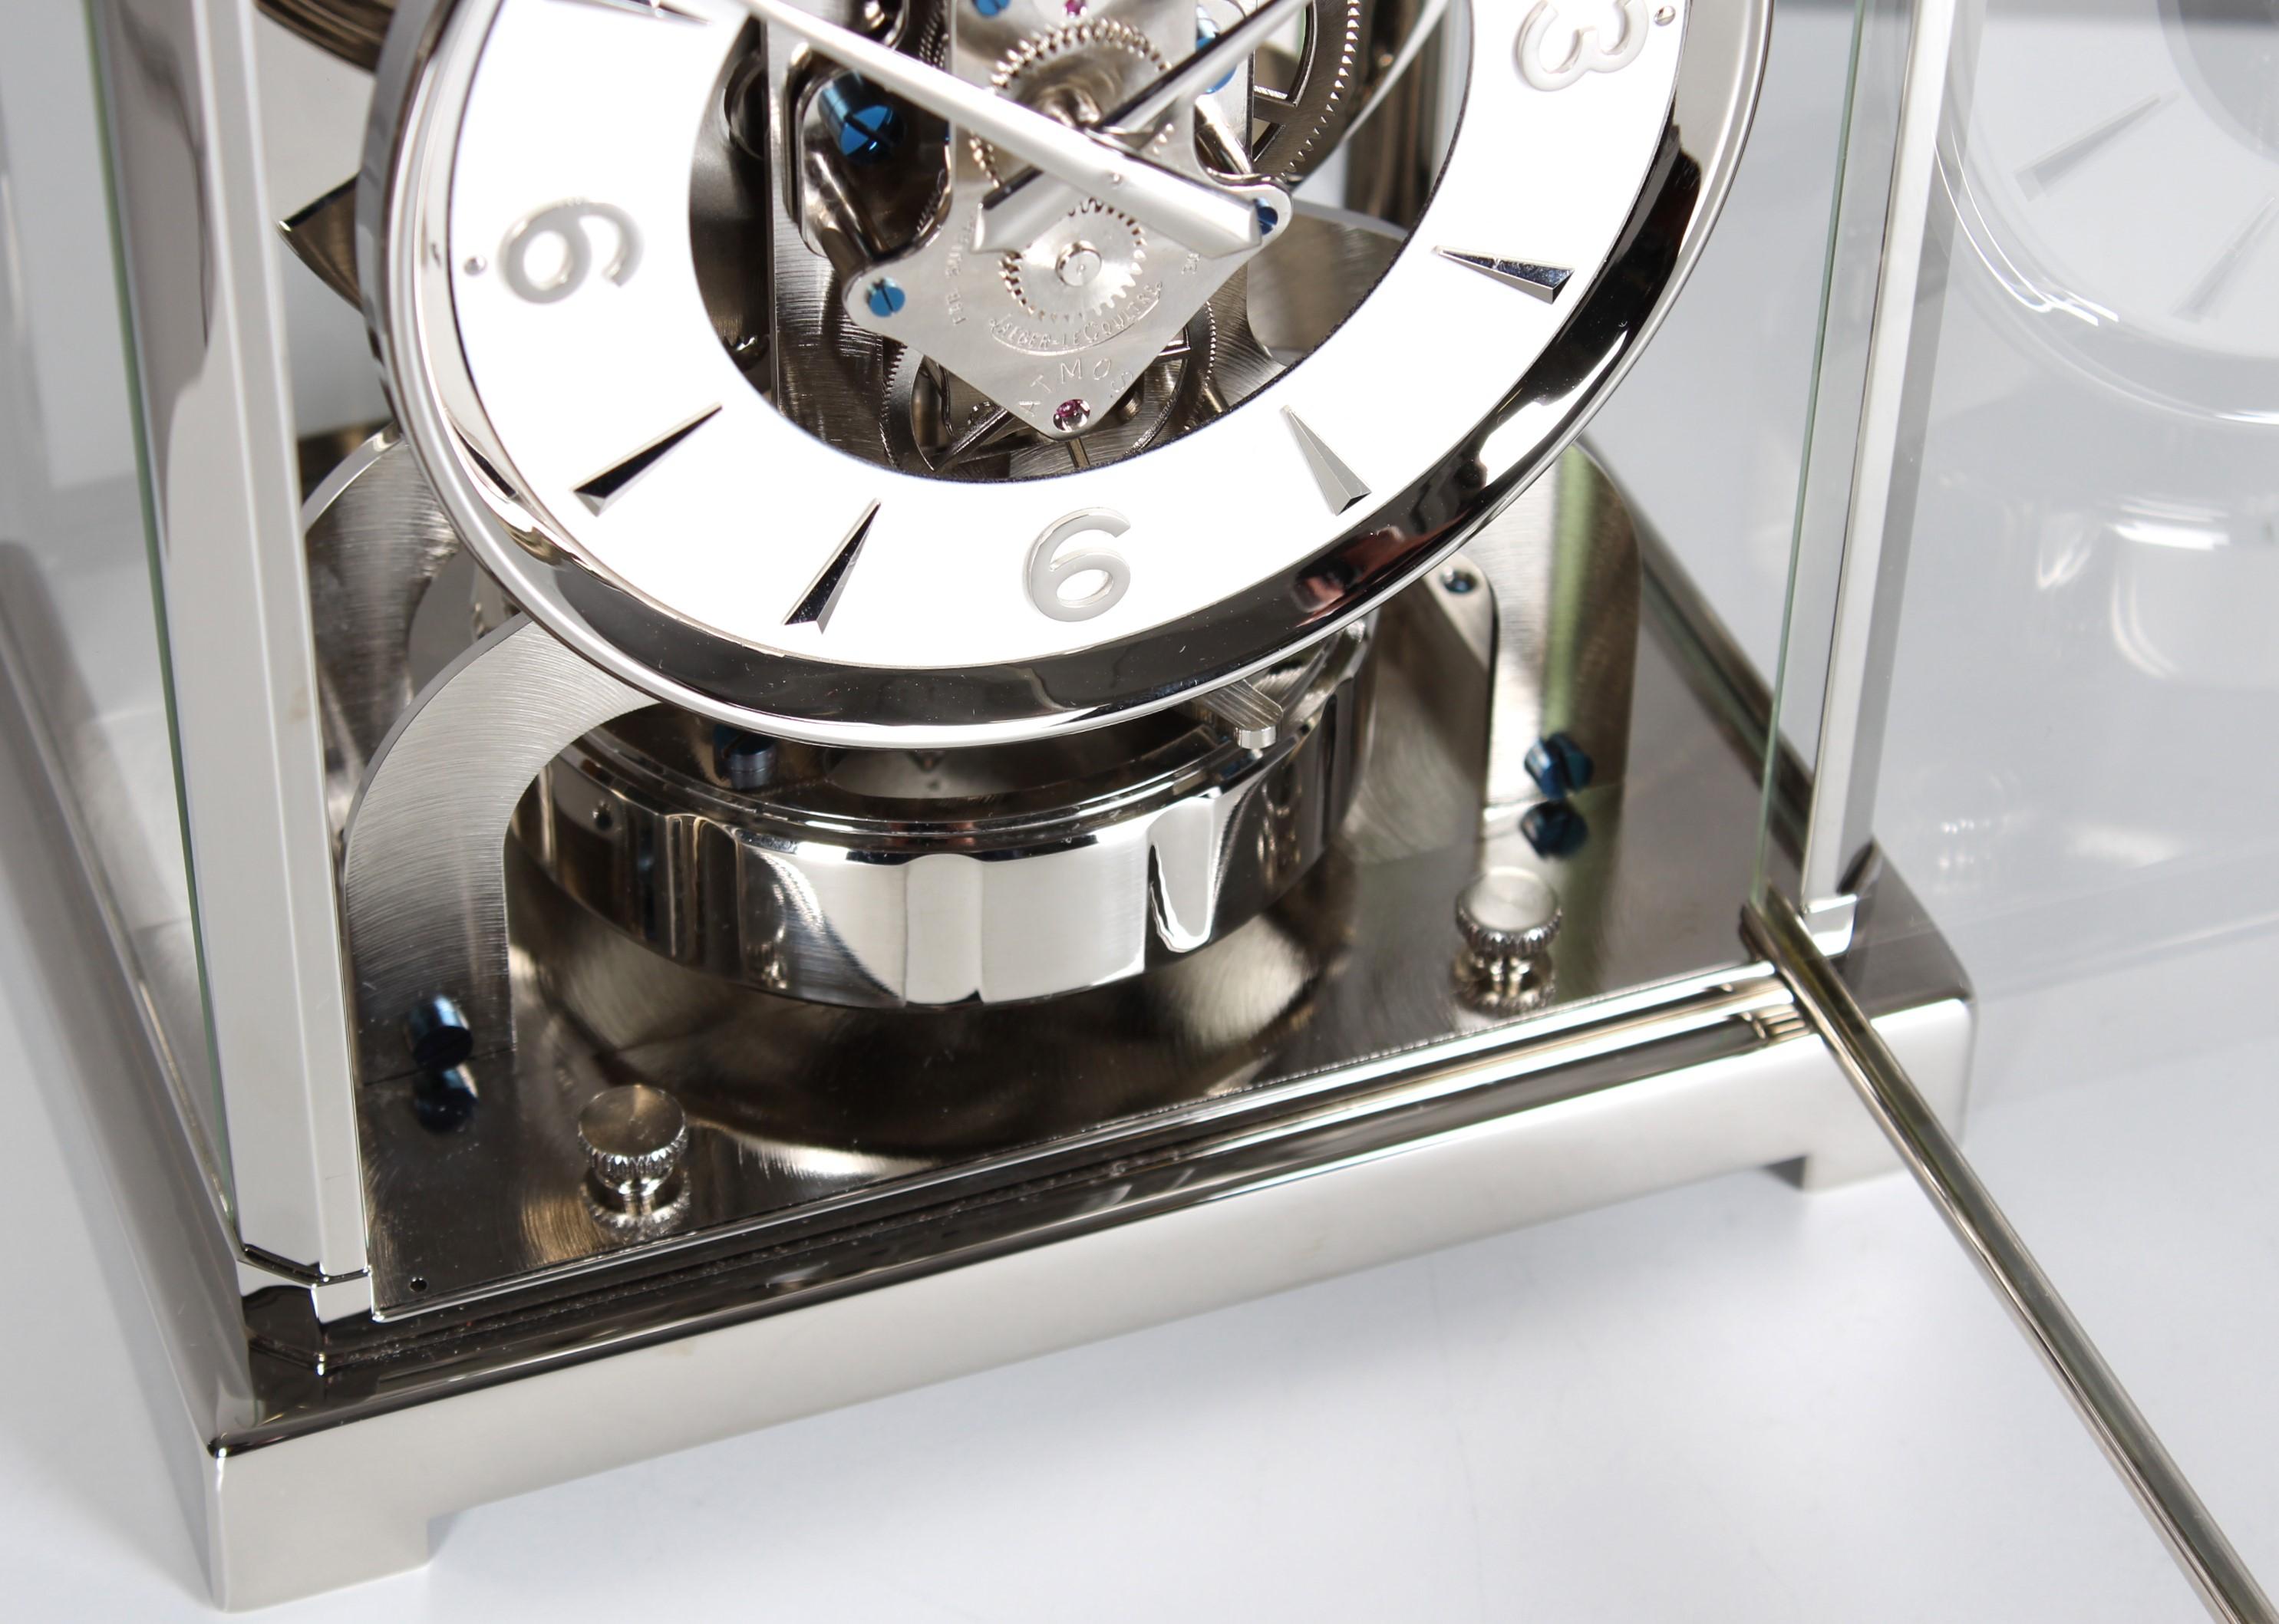 Brass Jaeger LeCoultre, Silver Atmos Clock from 1955, Revised and New Nickel-Plated